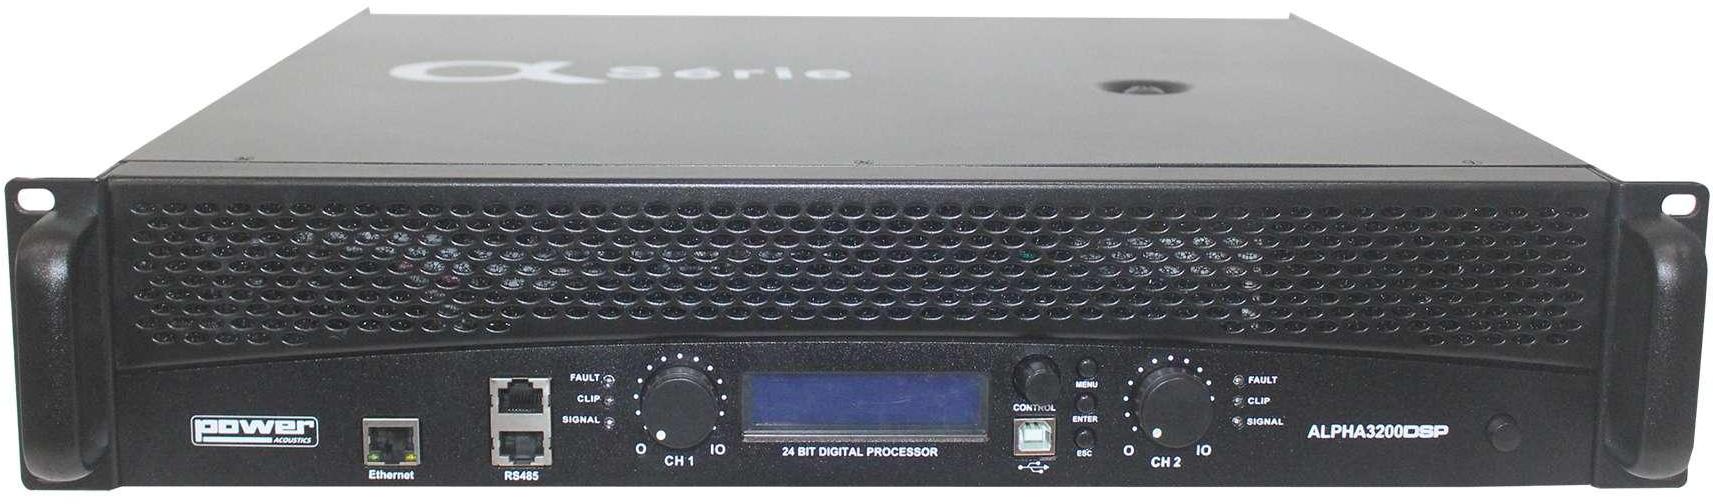 Power amplifier stereo Power Alpha 3200 Dsp